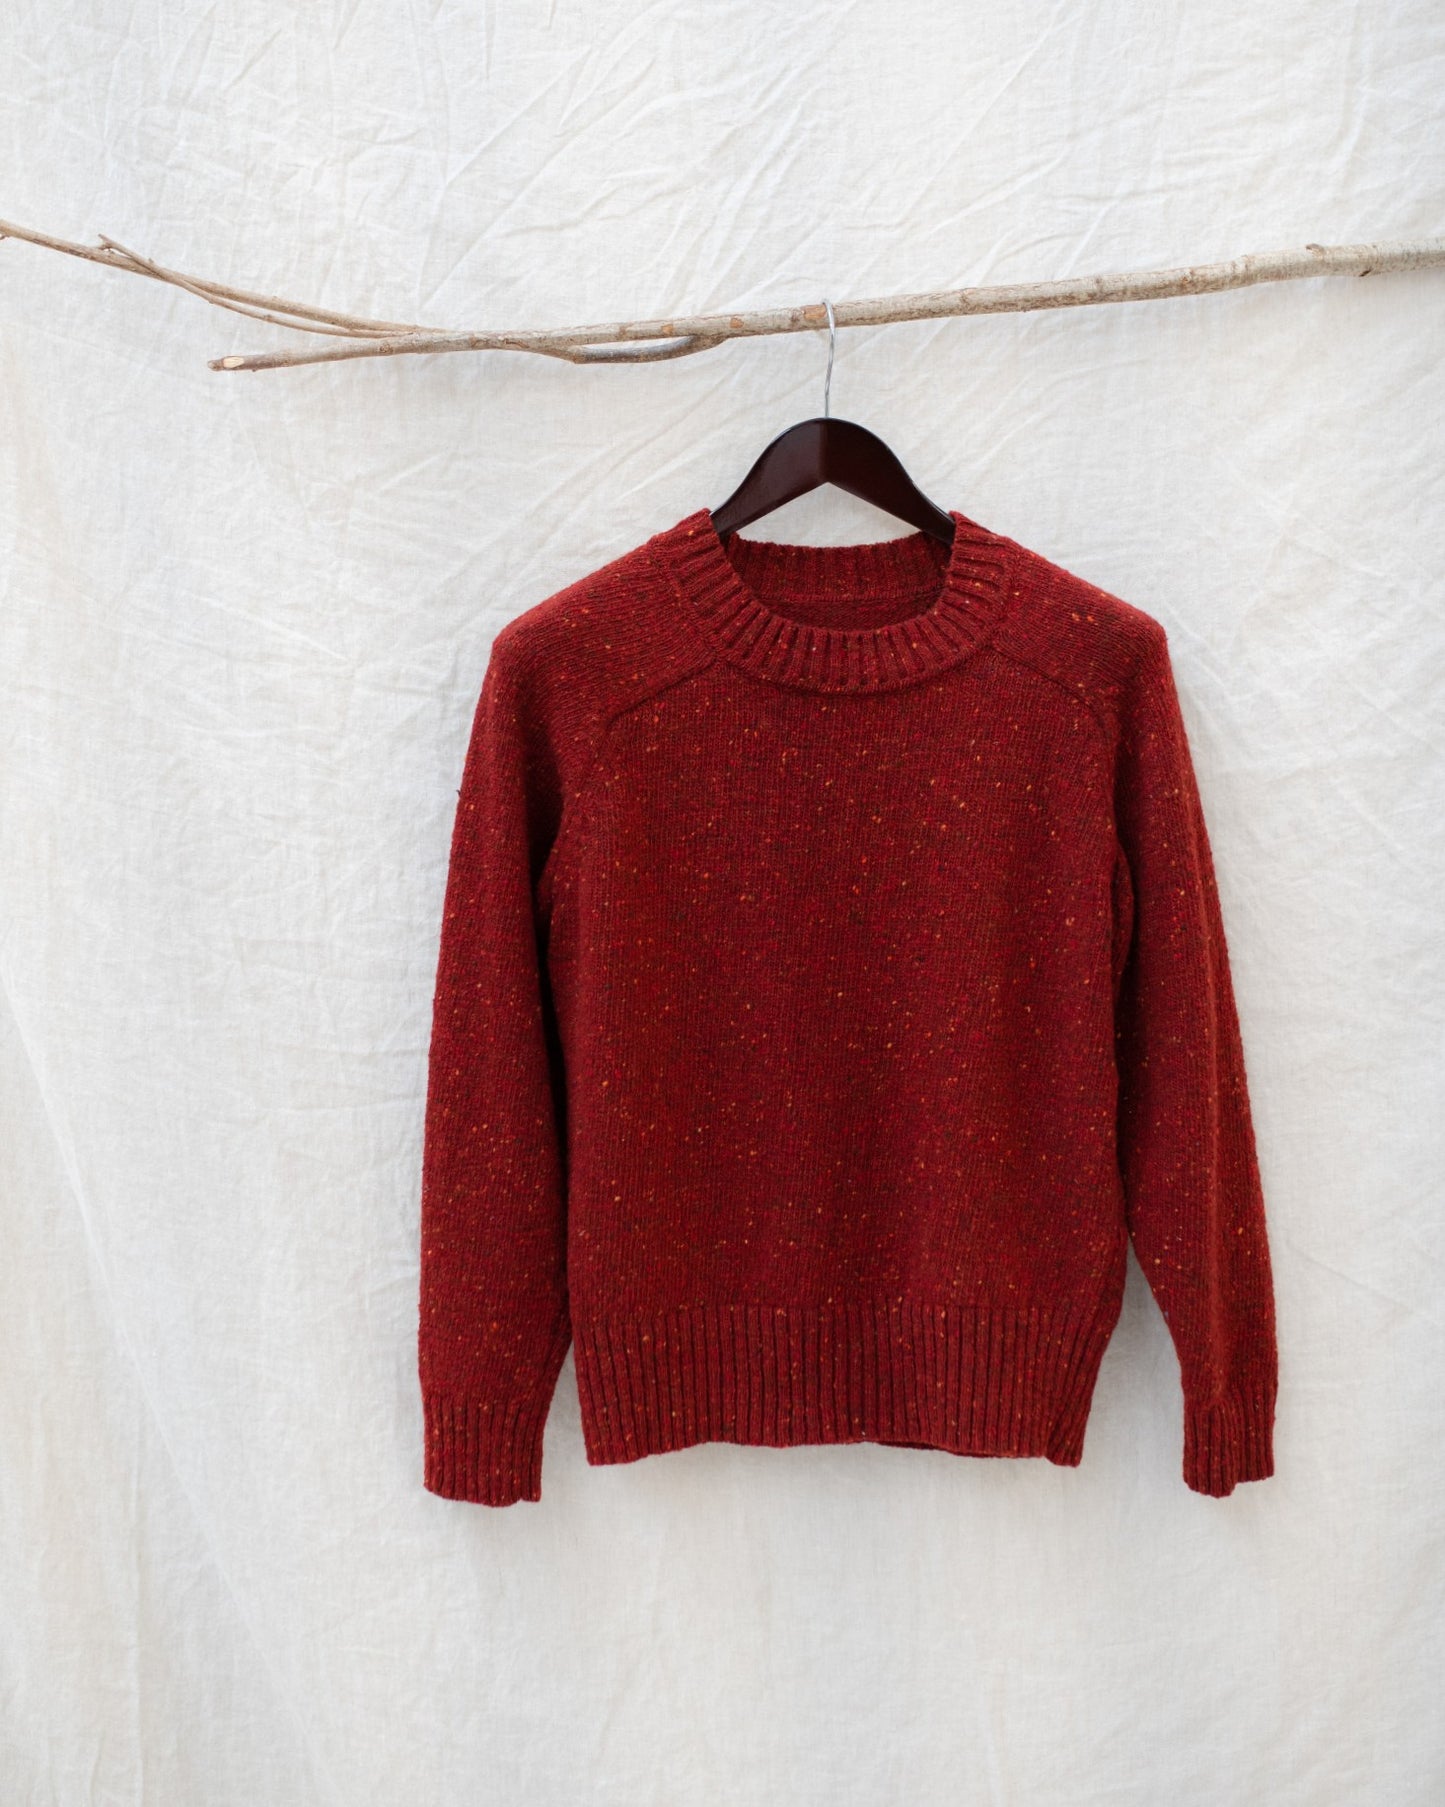 Donegal Merino Wool Sweater in Brick Red